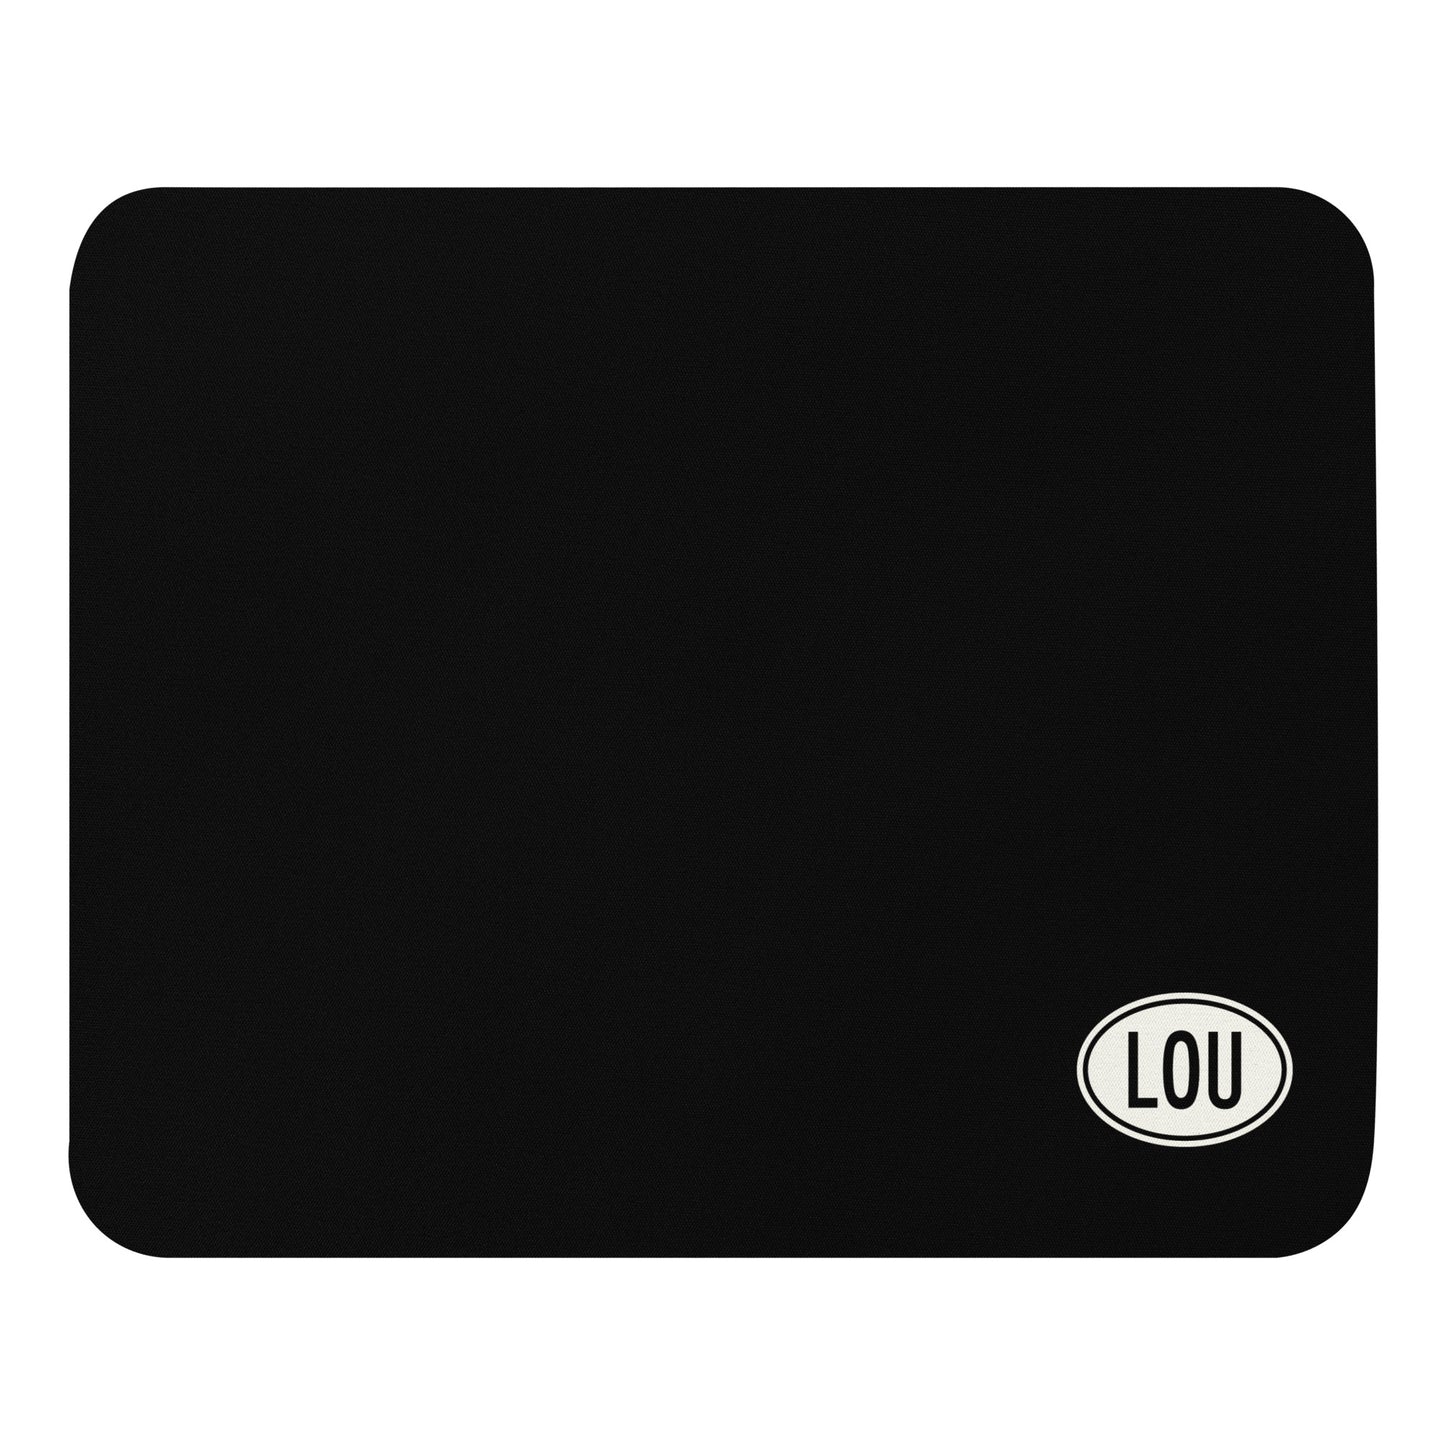 Unique Travel Gift Mouse Pad - White Oval • LOU Louisville • YHM Designs - Image 01